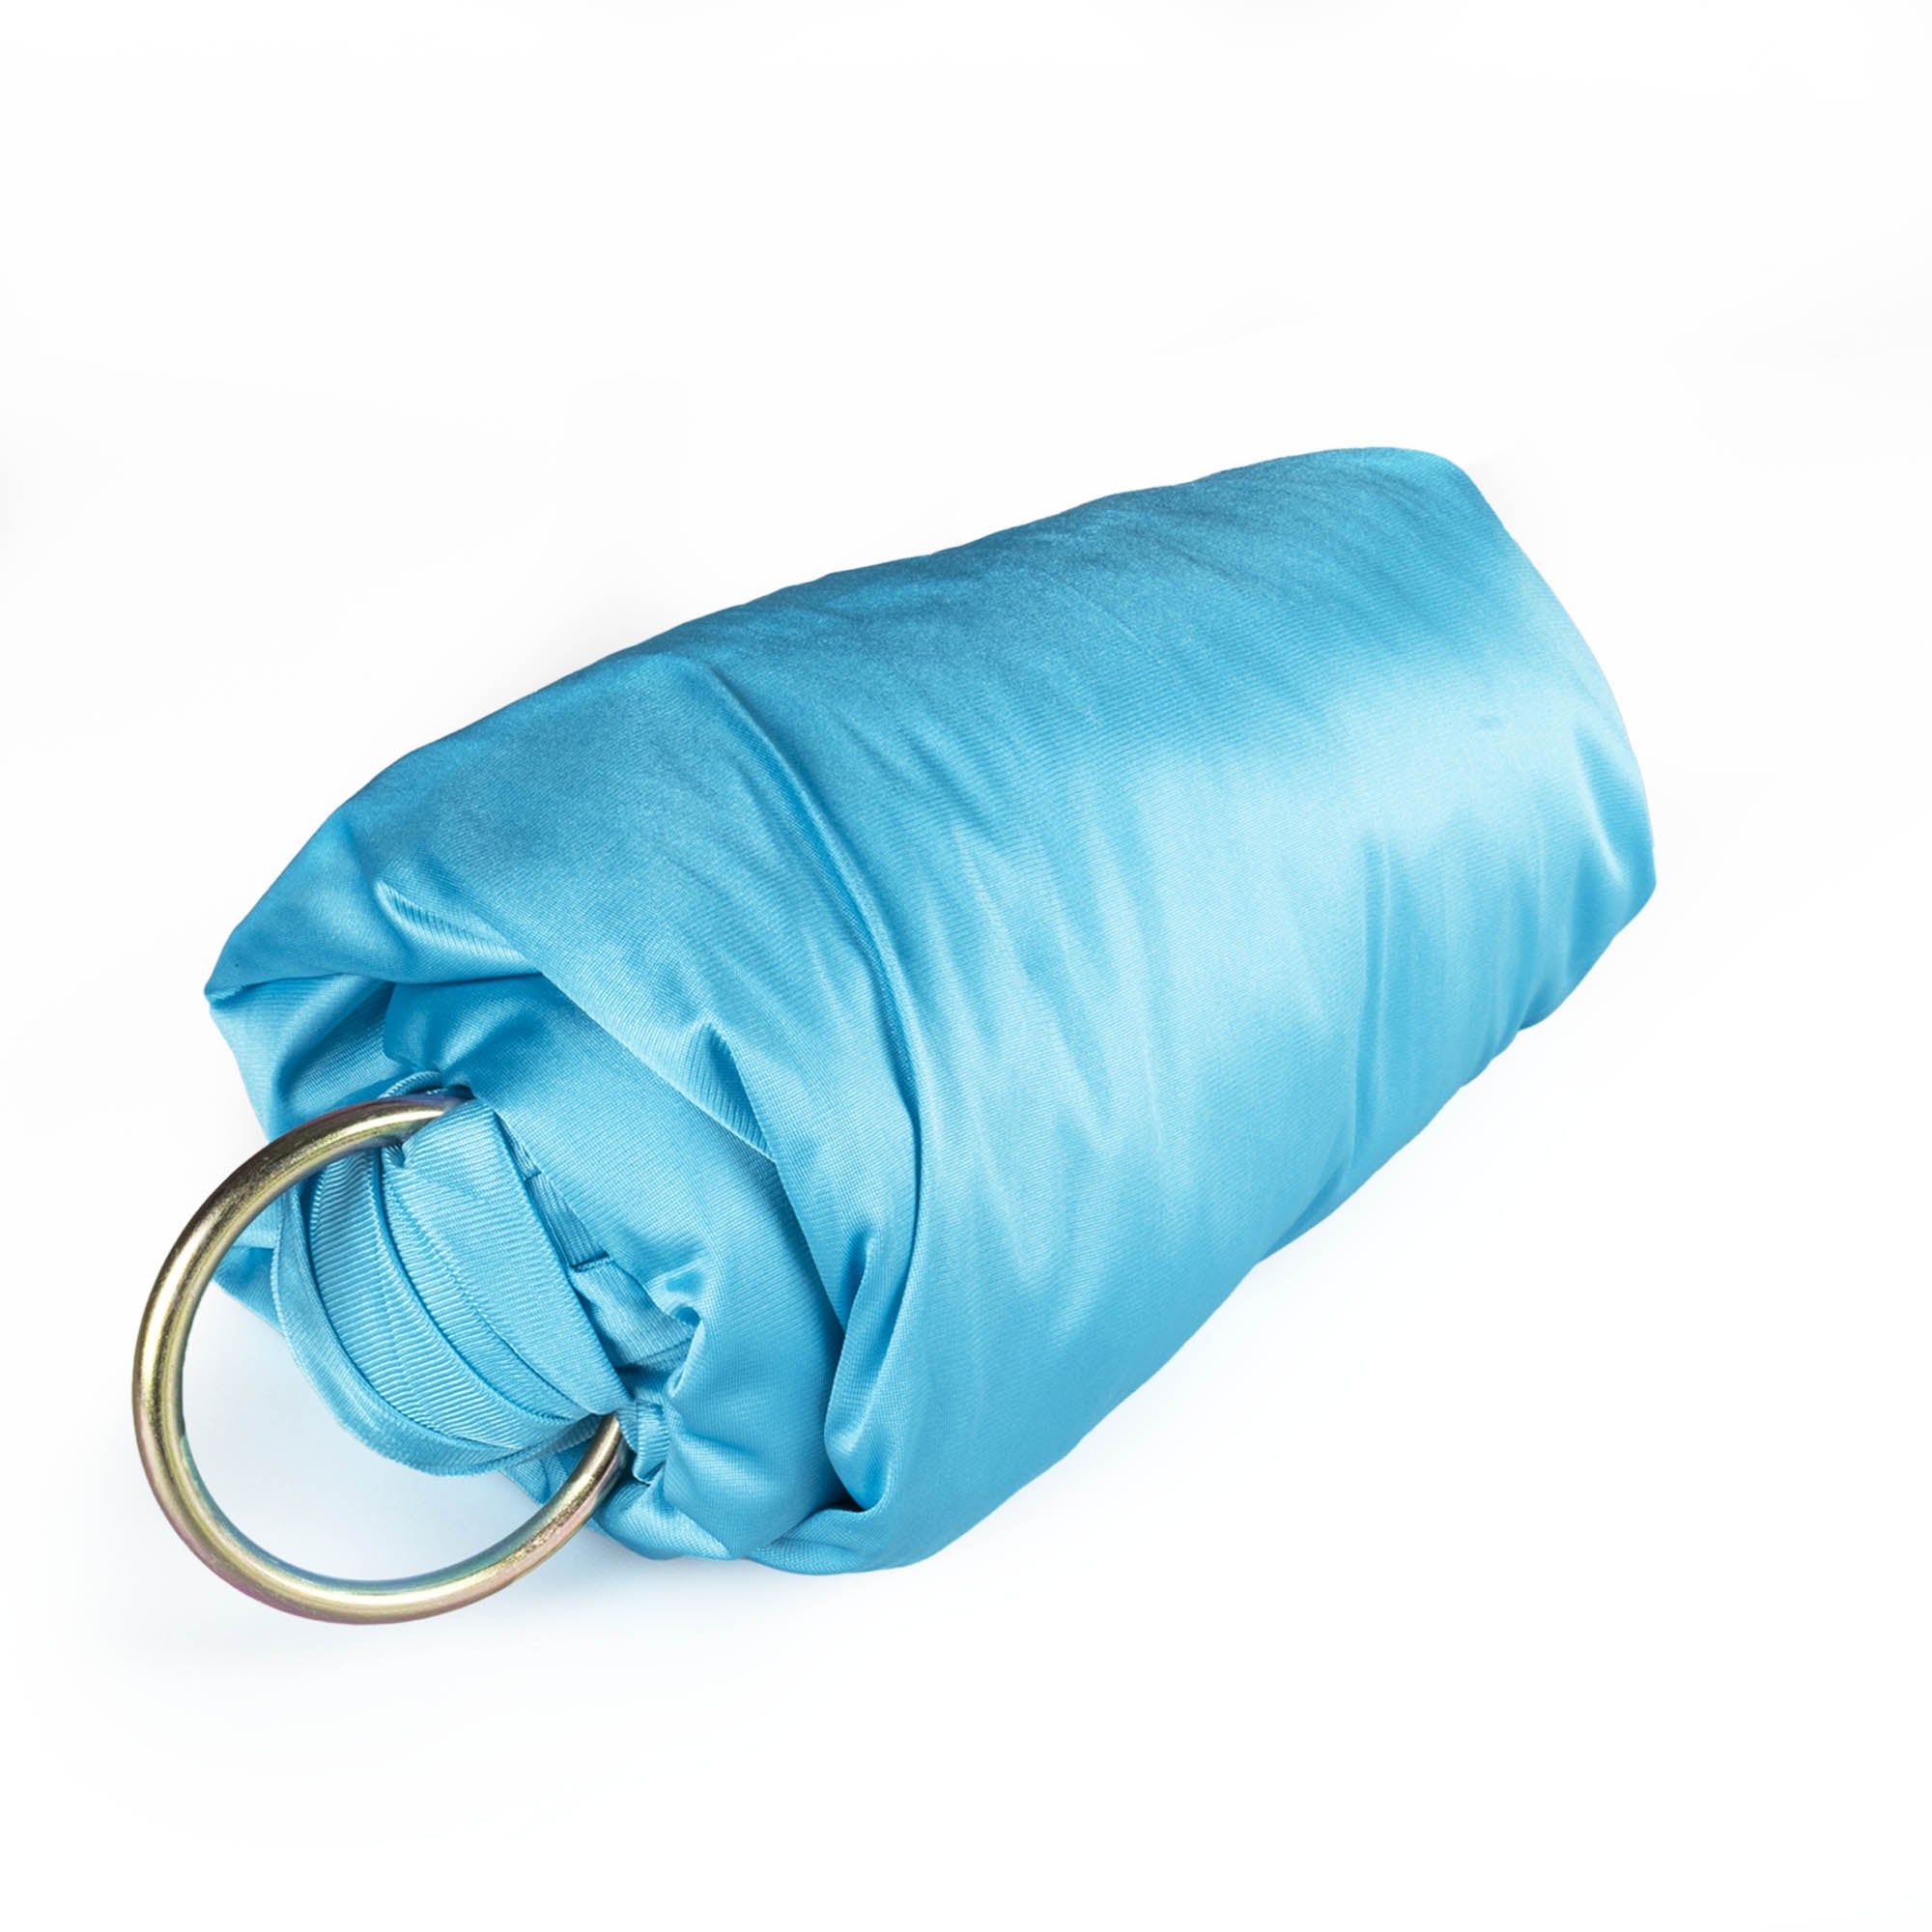 Turquoise yoga hammock with O rings attached